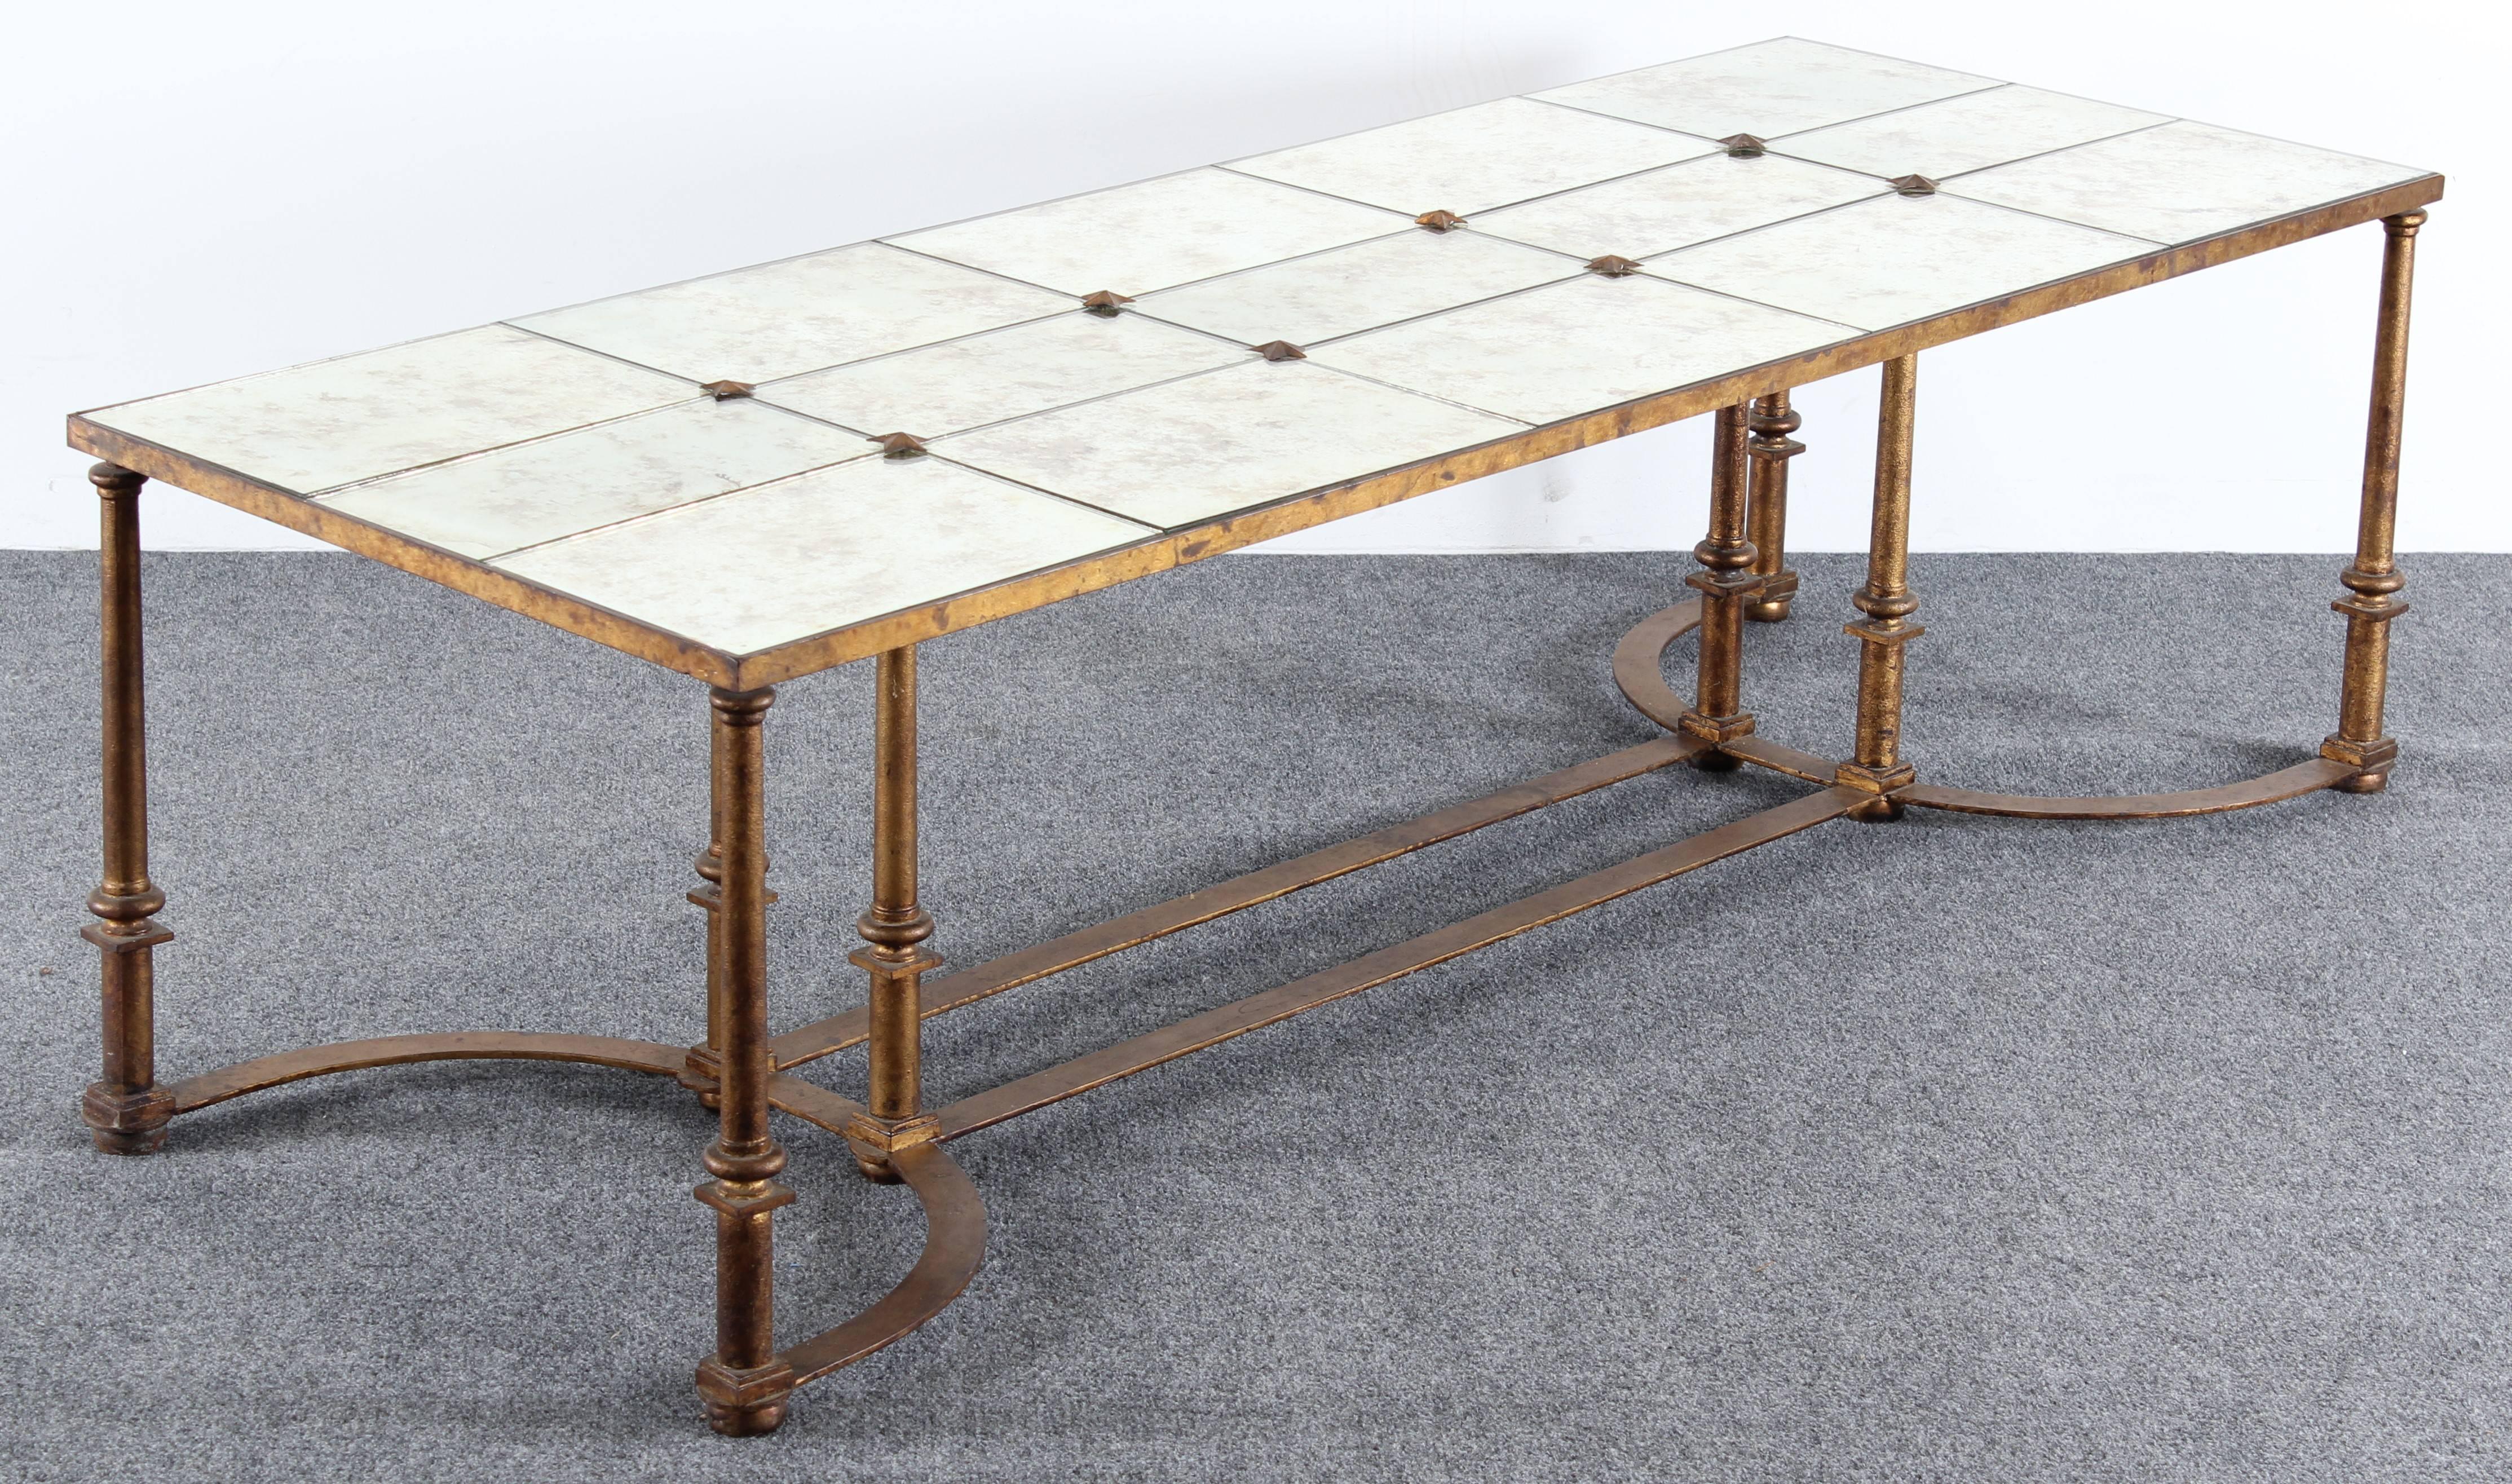 A stunning 1940s gilt wrought iron French coffee table in the style of Maison Baguès. Decorative panelled silvered églomisé top has mounted metal stars on surface.